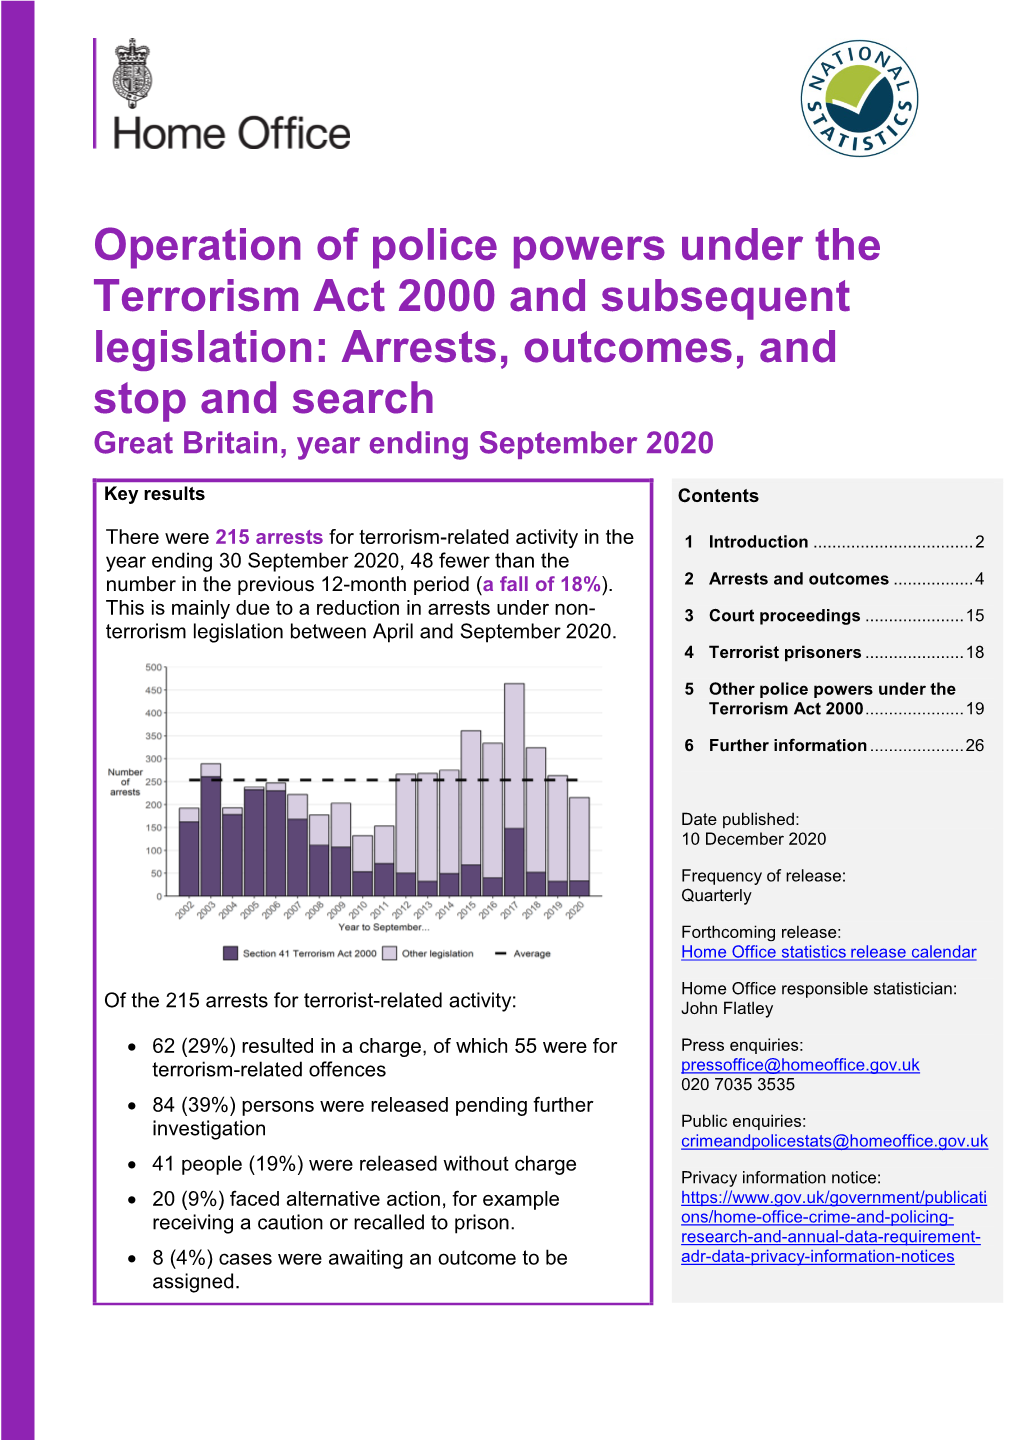 Operation of Police Powers Under the Terrorism Act 2000 and Subsequent Legislation: Arrests, Outcomes, and Stop and Search Great Britain, Year Ending September 2020